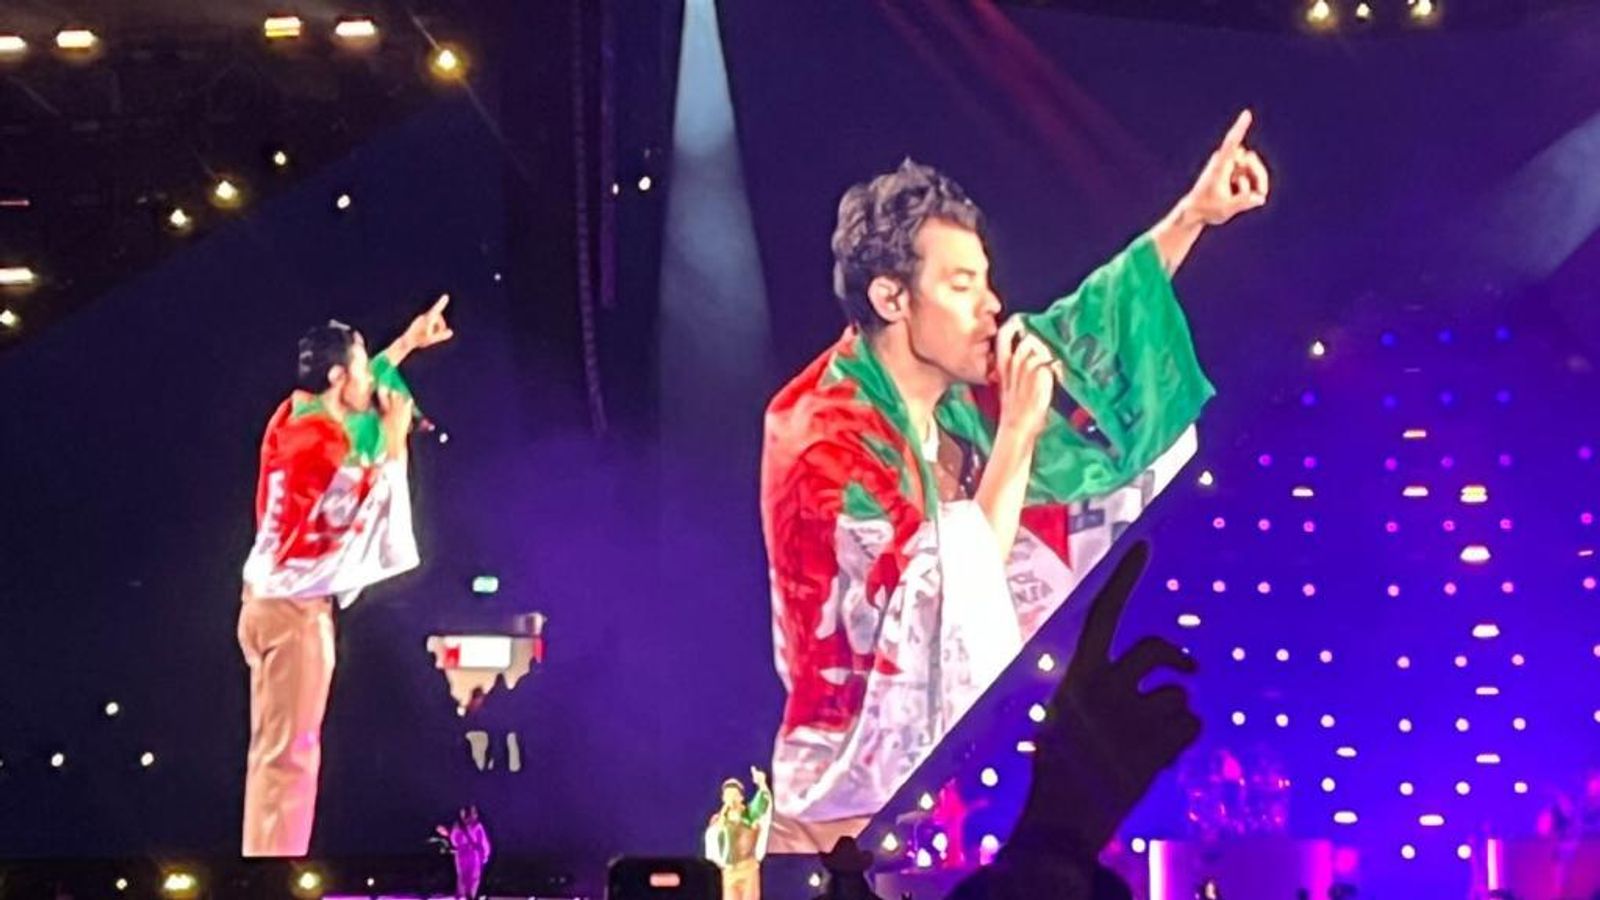 Harry Styles delights Cardiff fans on Love On Tour by wearing Welsh flag on stage